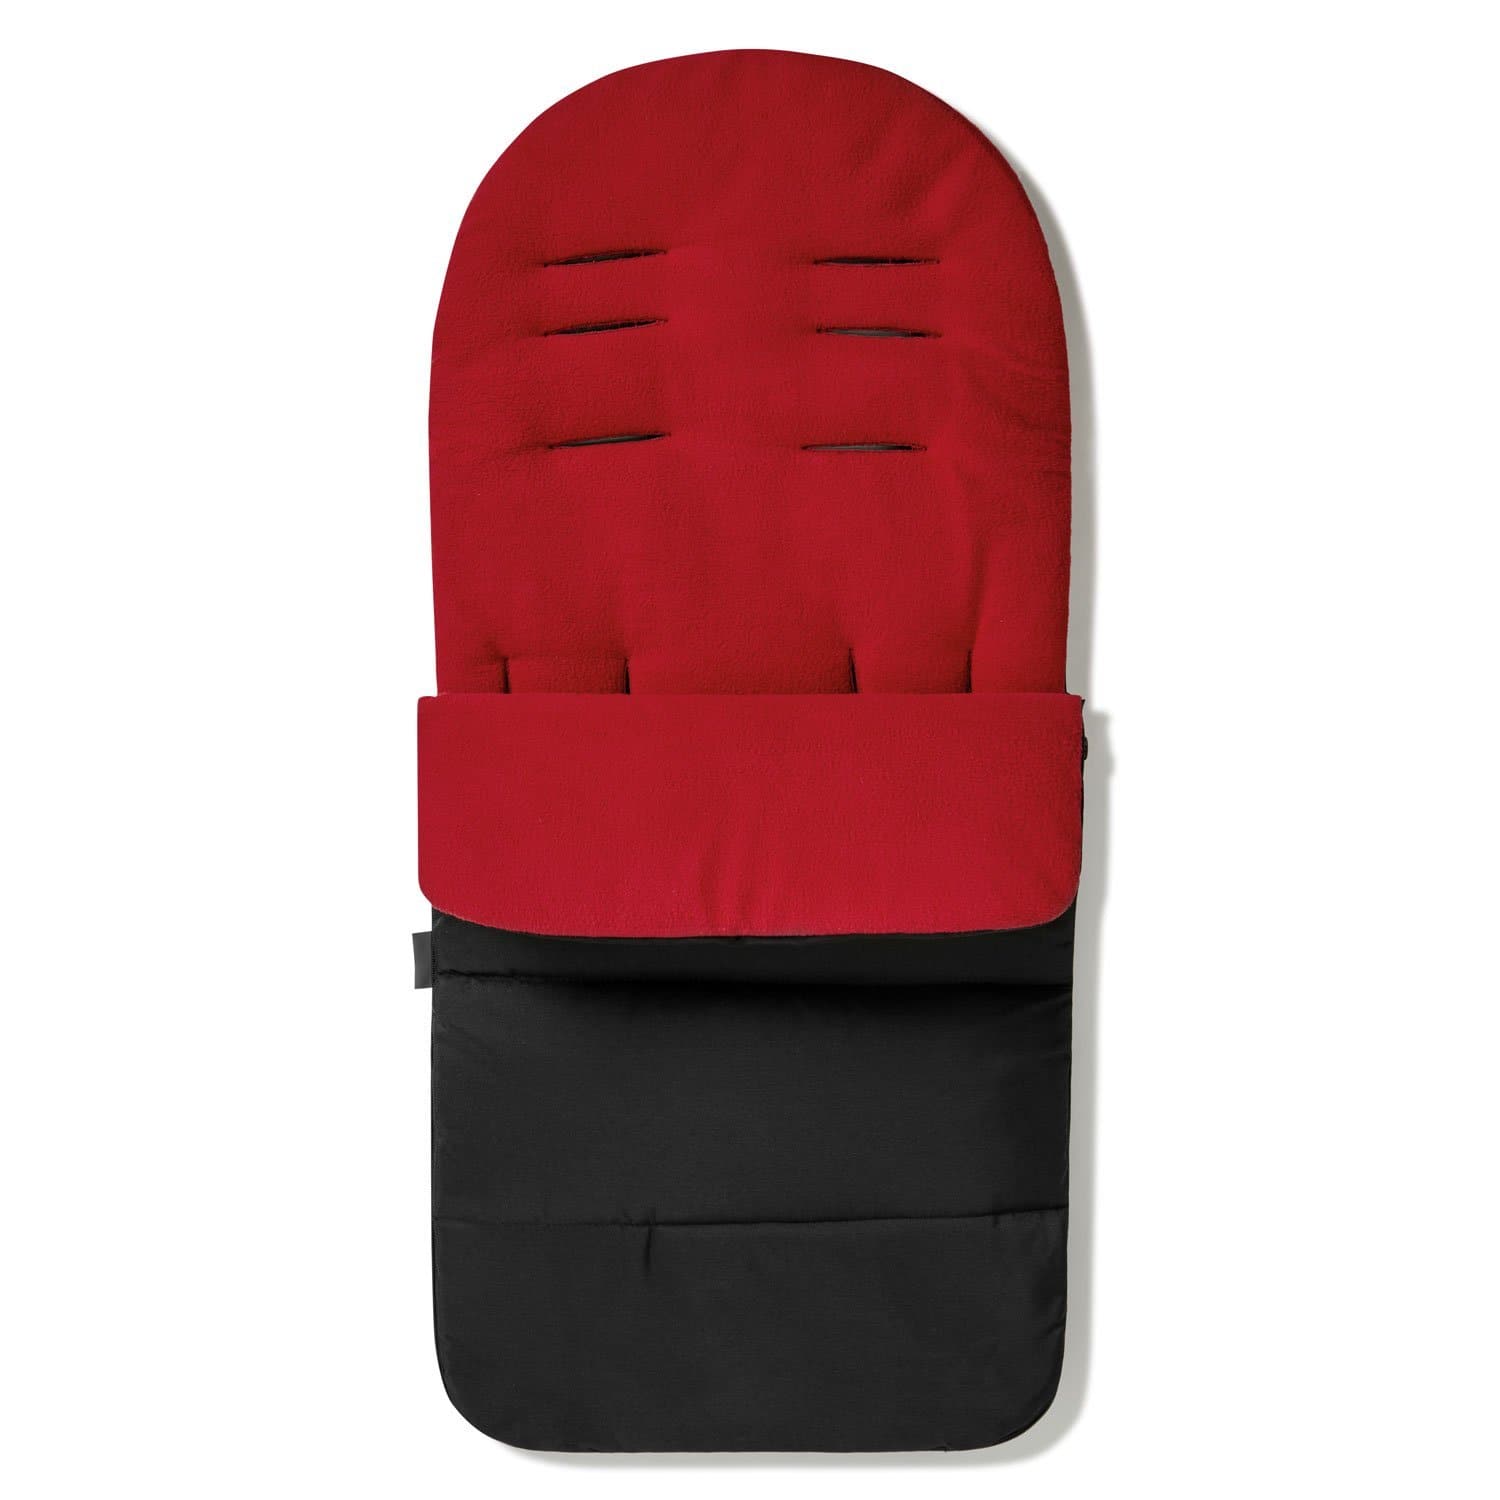 Premium Footmuff / Cosy Toes Compatible with Zeta - For Your Little One